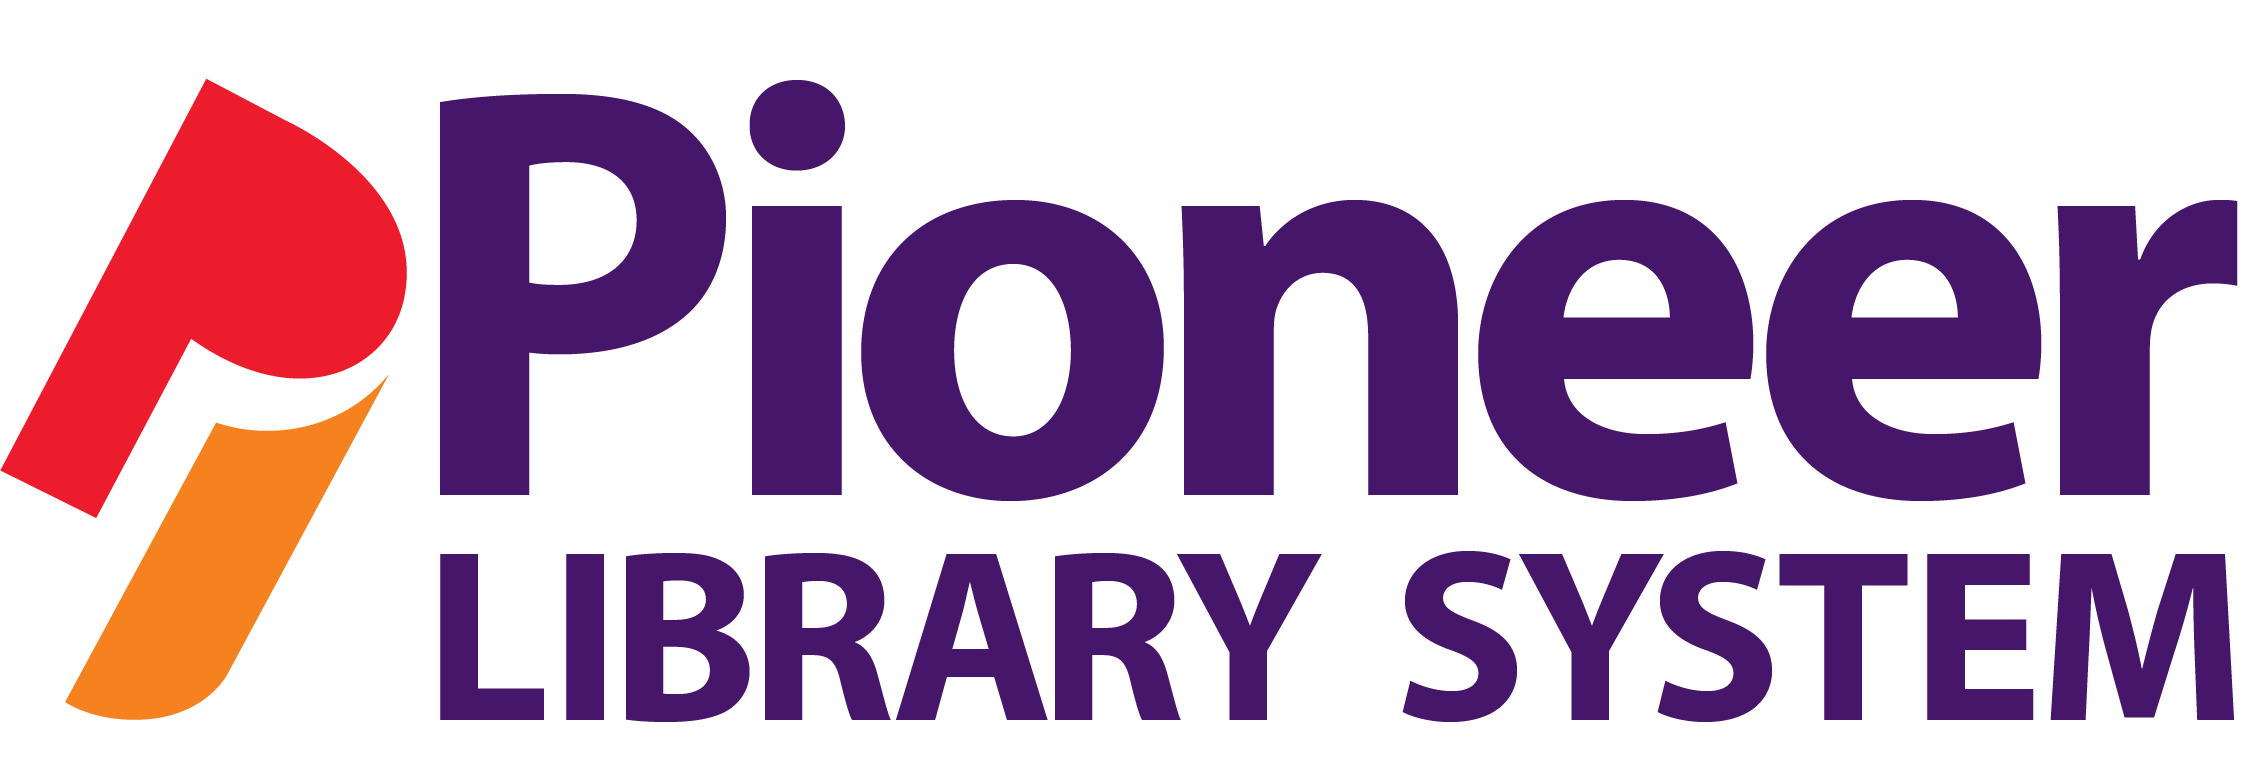 Pioneer Library System Logo